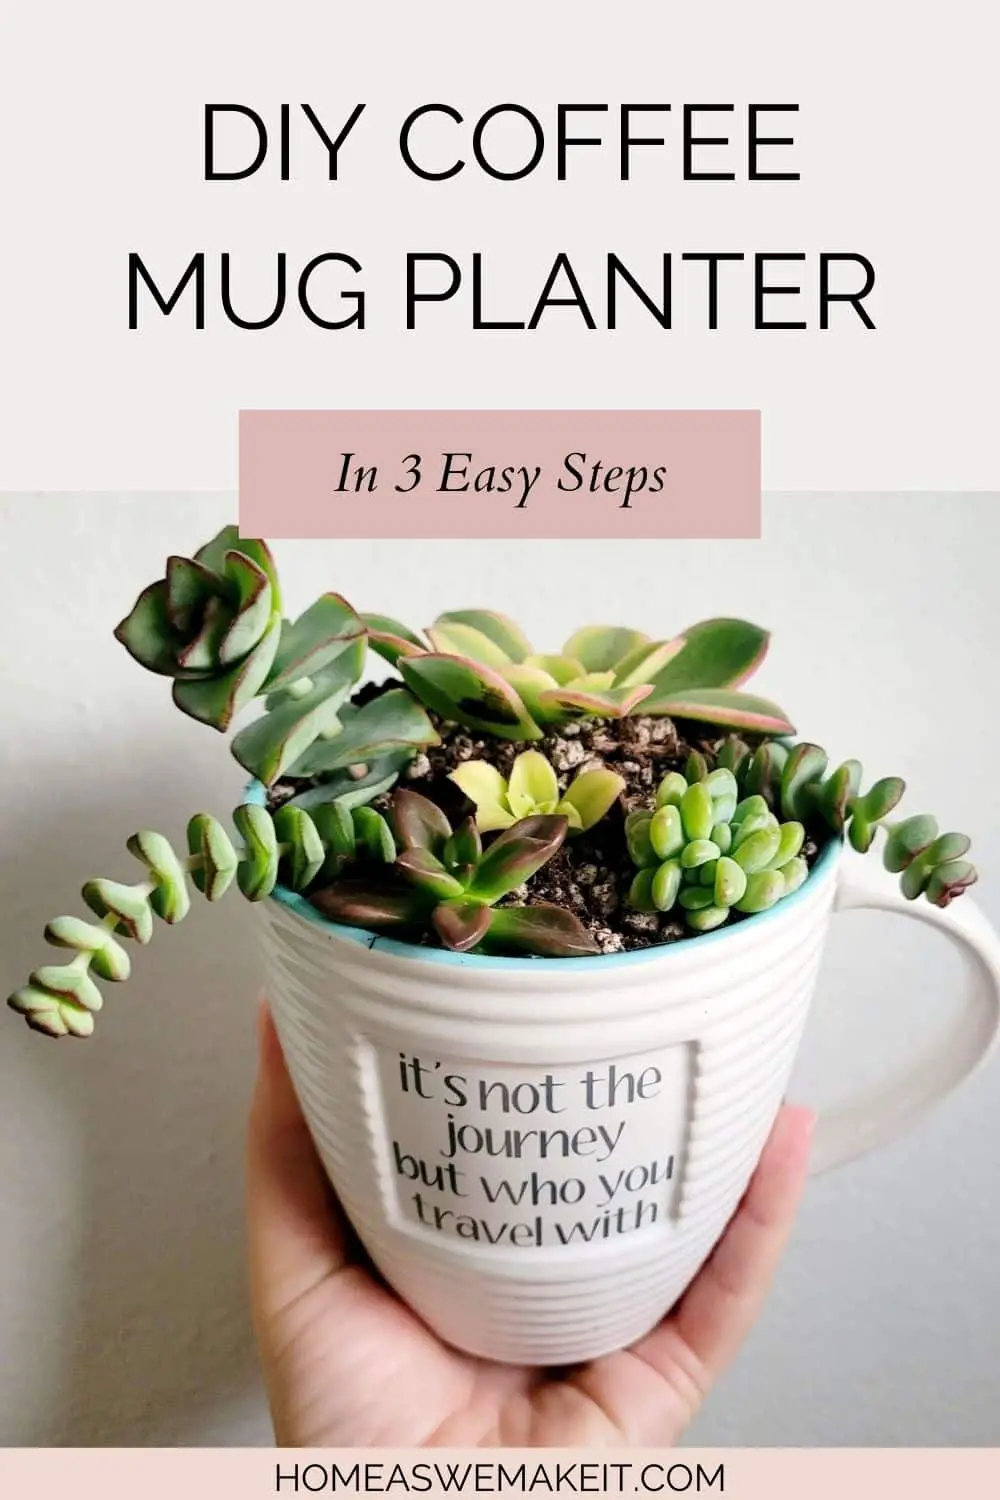 How to Turn a Coffee Mug into a Planter in 3 Steps